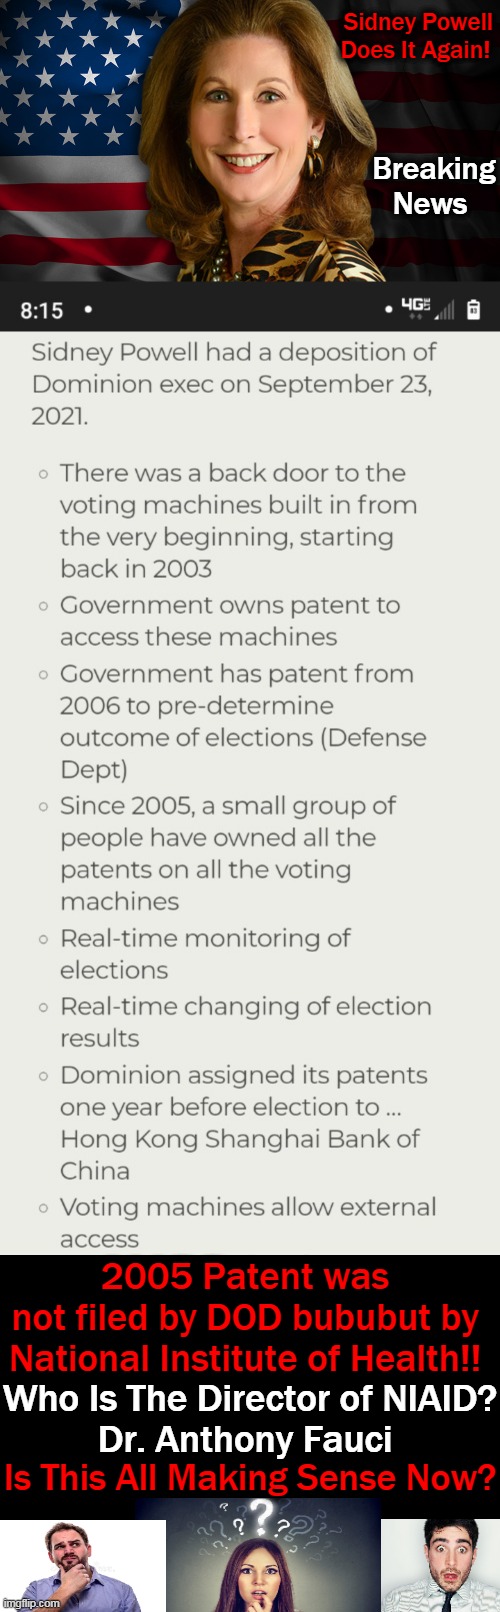 The More You Know! The DOD Patent To Flip Votes.... | Sidney Powell Does It Again! Breaking News; 2005 Patent was 
not filed by DOD bububut by 
National Institute of Health!! Who Is The Director of NIAID?
Dr. Anthony Fauci; Is This All Making Sense Now? | image tagged in politics,rigged elections,voter fraud,nih,defense dept,election fraud | made w/ Imgflip meme maker